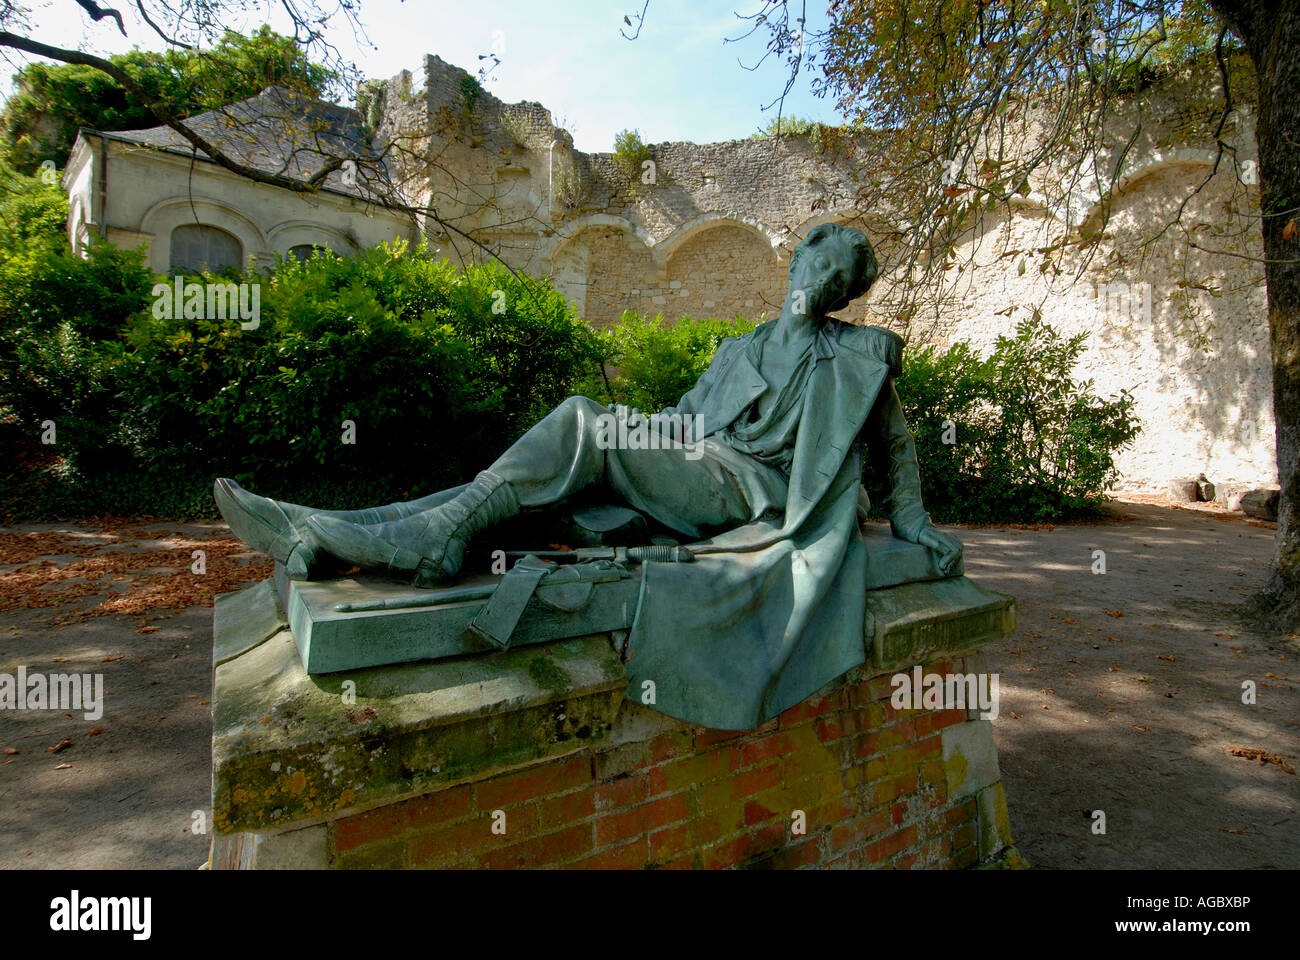 Reclining statue of Count Xavier Branicki in the grounds of the chateau at Montresor, Touraine, France. Stock Photo